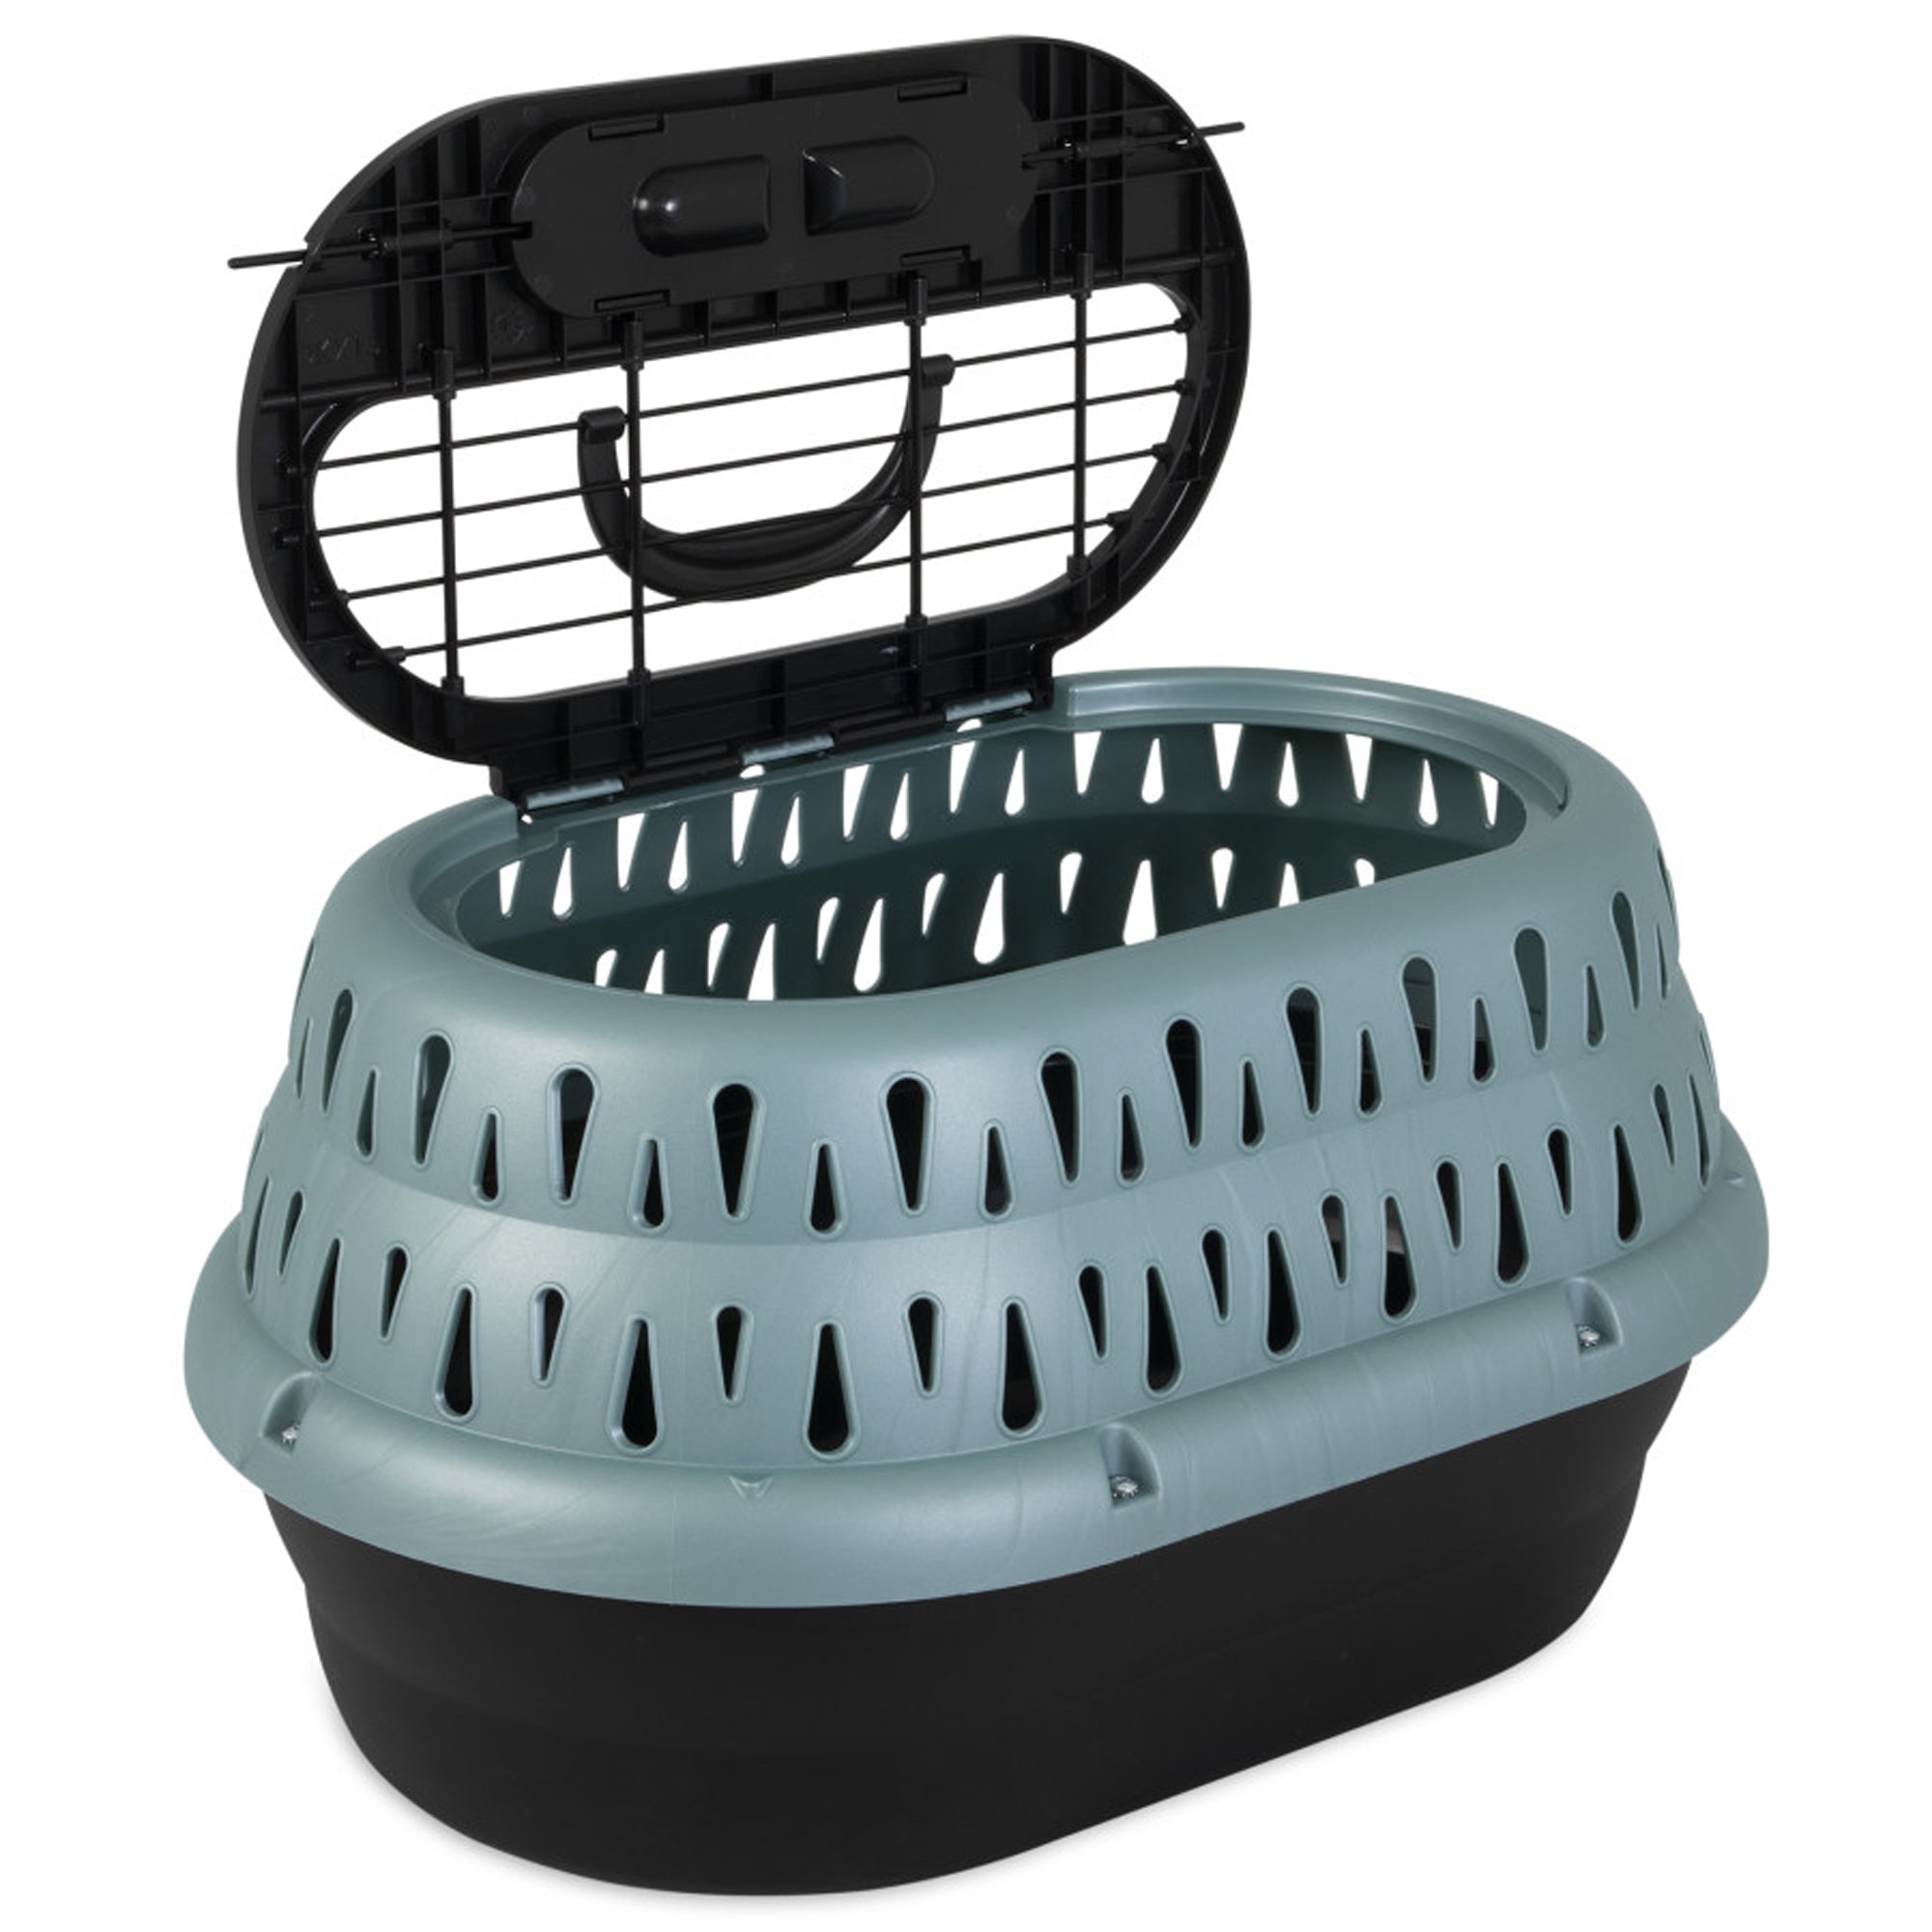 Petmate Top Load Cat Kennel 19-Inch